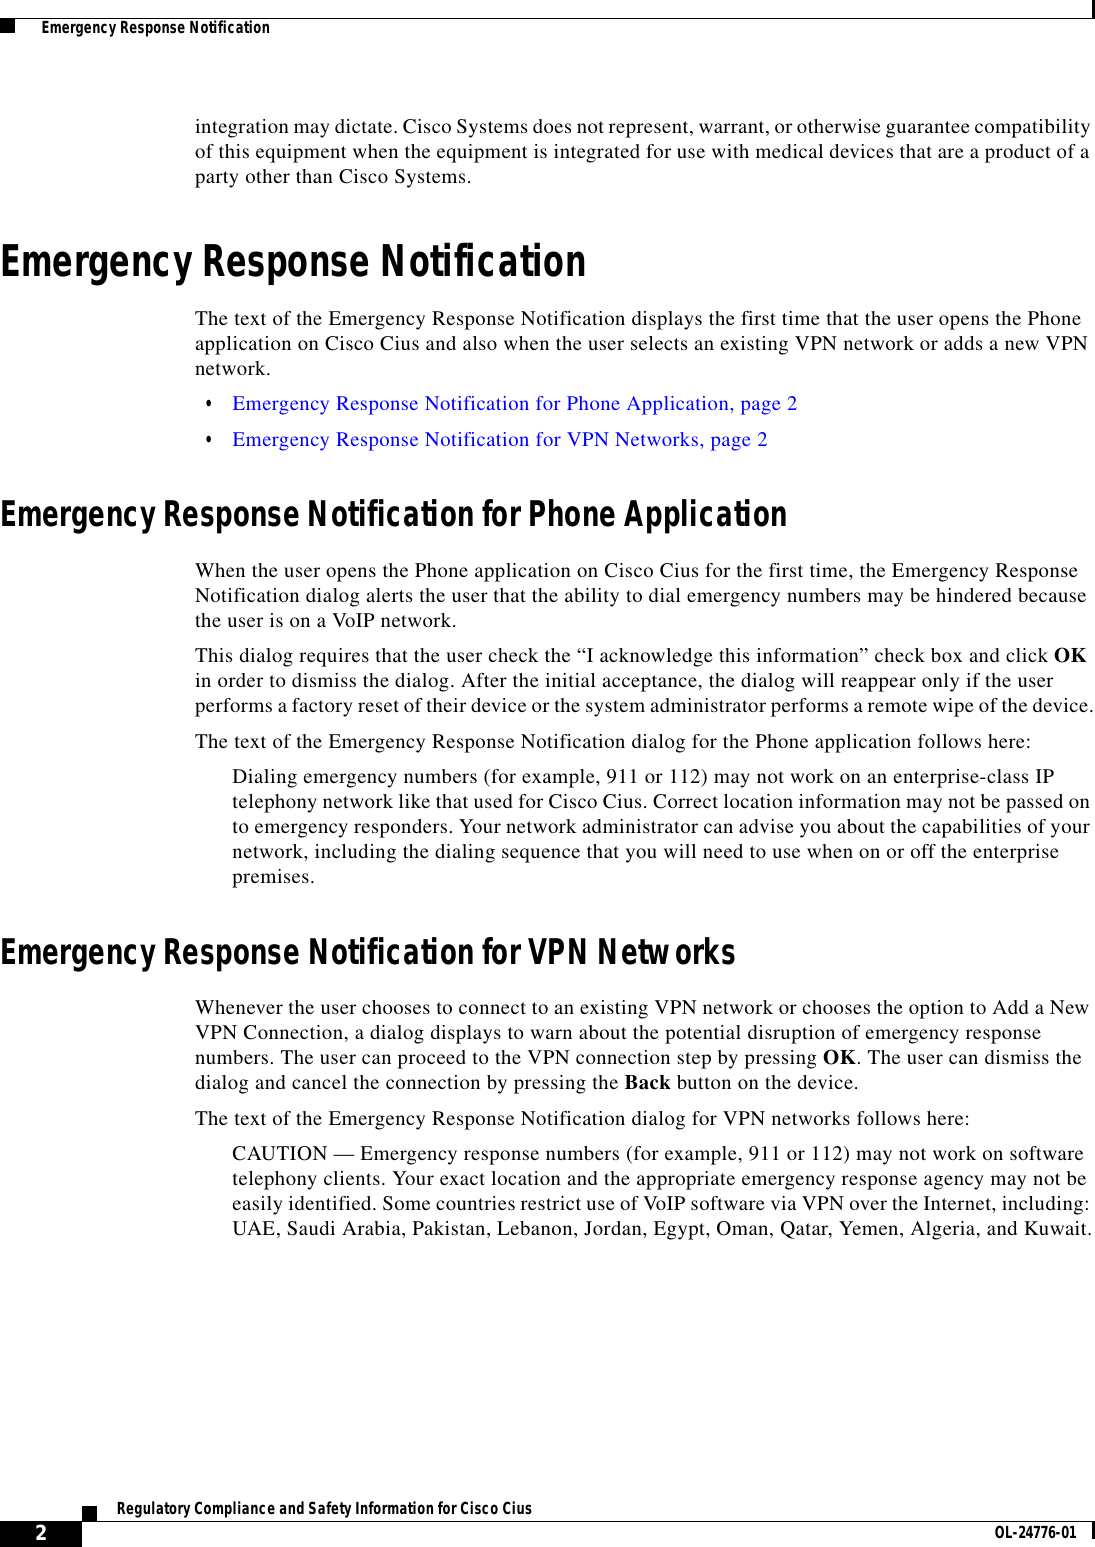  2Regulatory Compliance and Safety Information for Cisco Cius OL-24776-01  Emergency Response Notificationintegration may dictate. Cisco Systems does not represent, warrant, or otherwise guarantee compatibility of this equipment when the equipment is integrated for use with medical devices that are a product of a party other than Cisco Systems.Emergency Response NotificationThe text of the Emergency Response Notification displays the first time that the user opens the Phone application on Cisco Cius and also when the user selects an existing VPN network or adds a new VPN network. • Emergency Response Notification for Phone Application, page 2 • Emergency Response Notification for VPN Networks, page 2Emergency Response Notification for Phone ApplicationWhen the user opens the Phone application on Cisco Cius for the first time, the Emergency Response Notification dialog alerts the user that the ability to dial emergency numbers may be hindered because the user is on a VoIP network.This dialog requires that the user check the “I acknowledge this information” check box and click OK in order to dismiss the dialog. After the initial acceptance, the dialog will reappear only if the user performs a factory reset of their device or the system administrator performs a remote wipe of the device.The text of the Emergency Response Notification dialog for the Phone application follows here:Dialing emergency numbers (for example, 911 or 112) may not work on an enterprise-class IP telephony network like that used for Cisco Cius. Correct location information may not be passed on to emergency responders. Your network administrator can advise you about the capabilities of your network, including the dialing sequence that you will need to use when on or off the enterprise premises.Emergency Response Notification for VPN NetworksWhenever the user chooses to connect to an existing VPN network or chooses the option to Add a New VPN Connection, a dialog displays to warn about the potential disruption of emergency response numbers. The user can proceed to the VPN connection step by pressing OK. The user can dismiss the dialog and cancel the connection by pressing the Back button on the device.The text of the Emergency Response Notification dialog for VPN networks follows here:CAUTION — Emergency response numbers (for example, 911 or 112) may not work on software telephony clients. Your exact location and the appropriate emergency response agency may not be easily identified. Some countries restrict use of VoIP software via VPN over the Internet, including: UAE, Saudi Arabia, Pakistan, Lebanon, Jordan, Egypt, Oman, Qatar, Yemen, Algeria, and Kuwait.